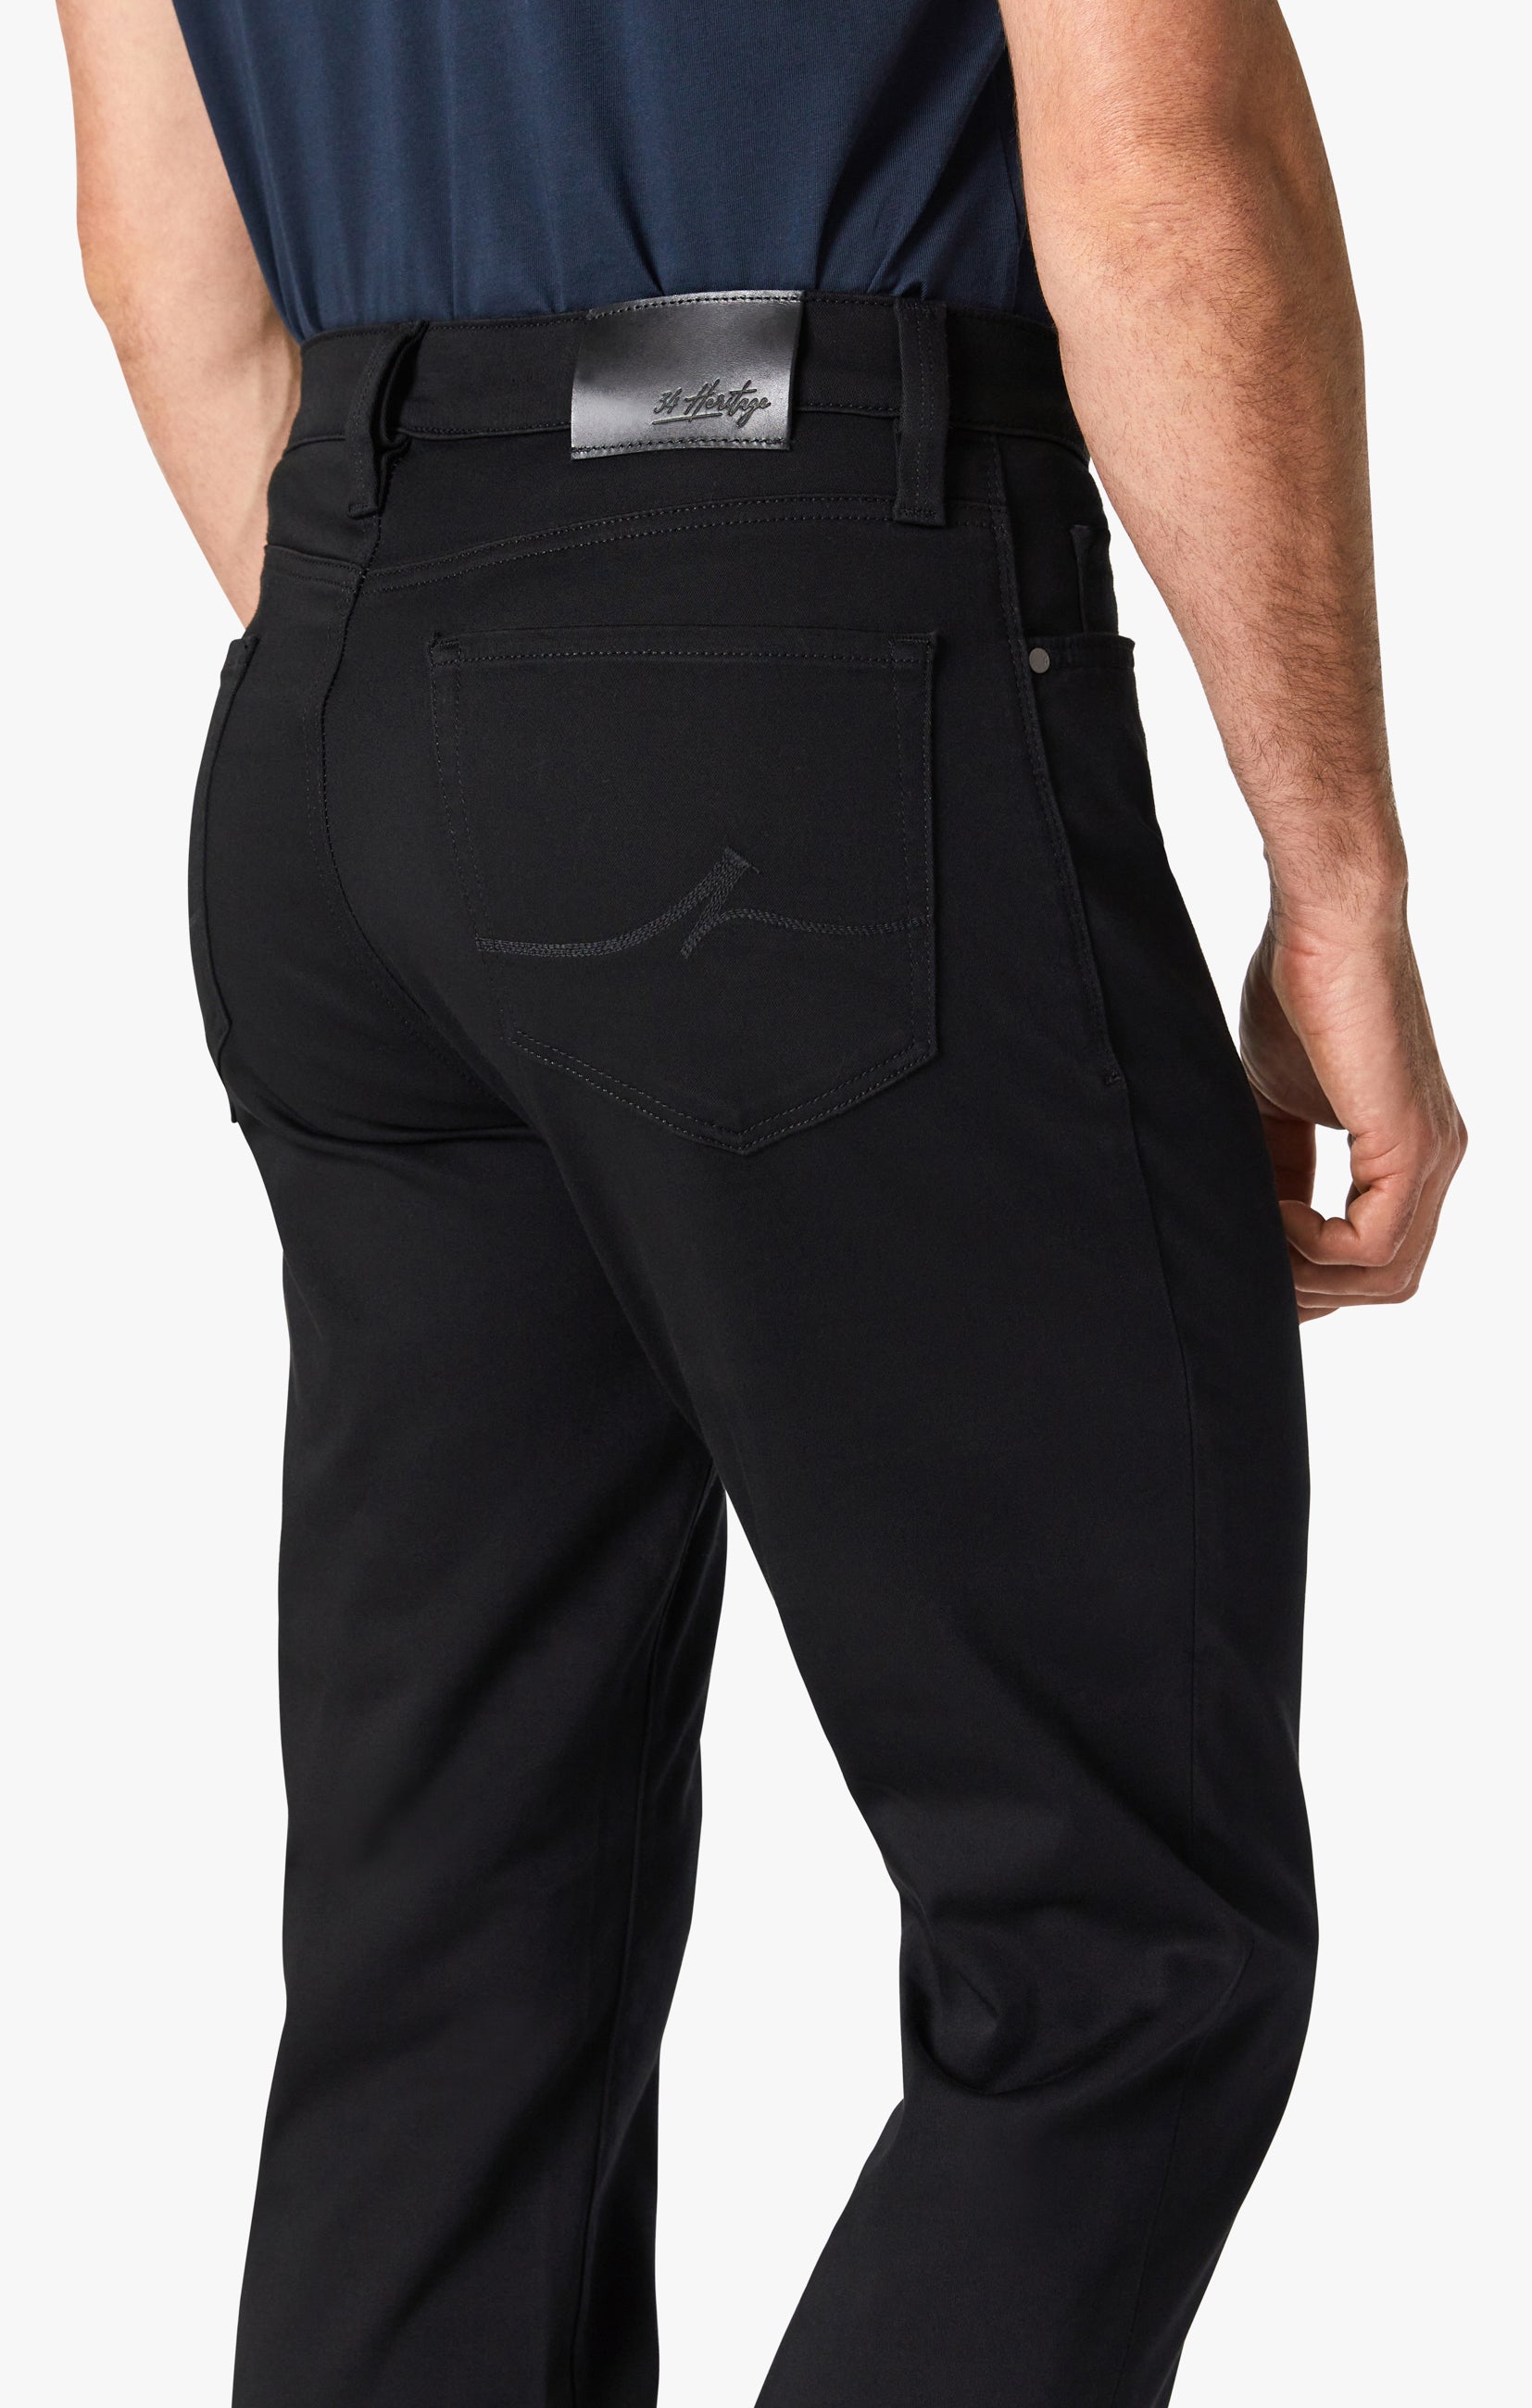 Charisma Classic Fit Jeans in Select Double Black Image 3